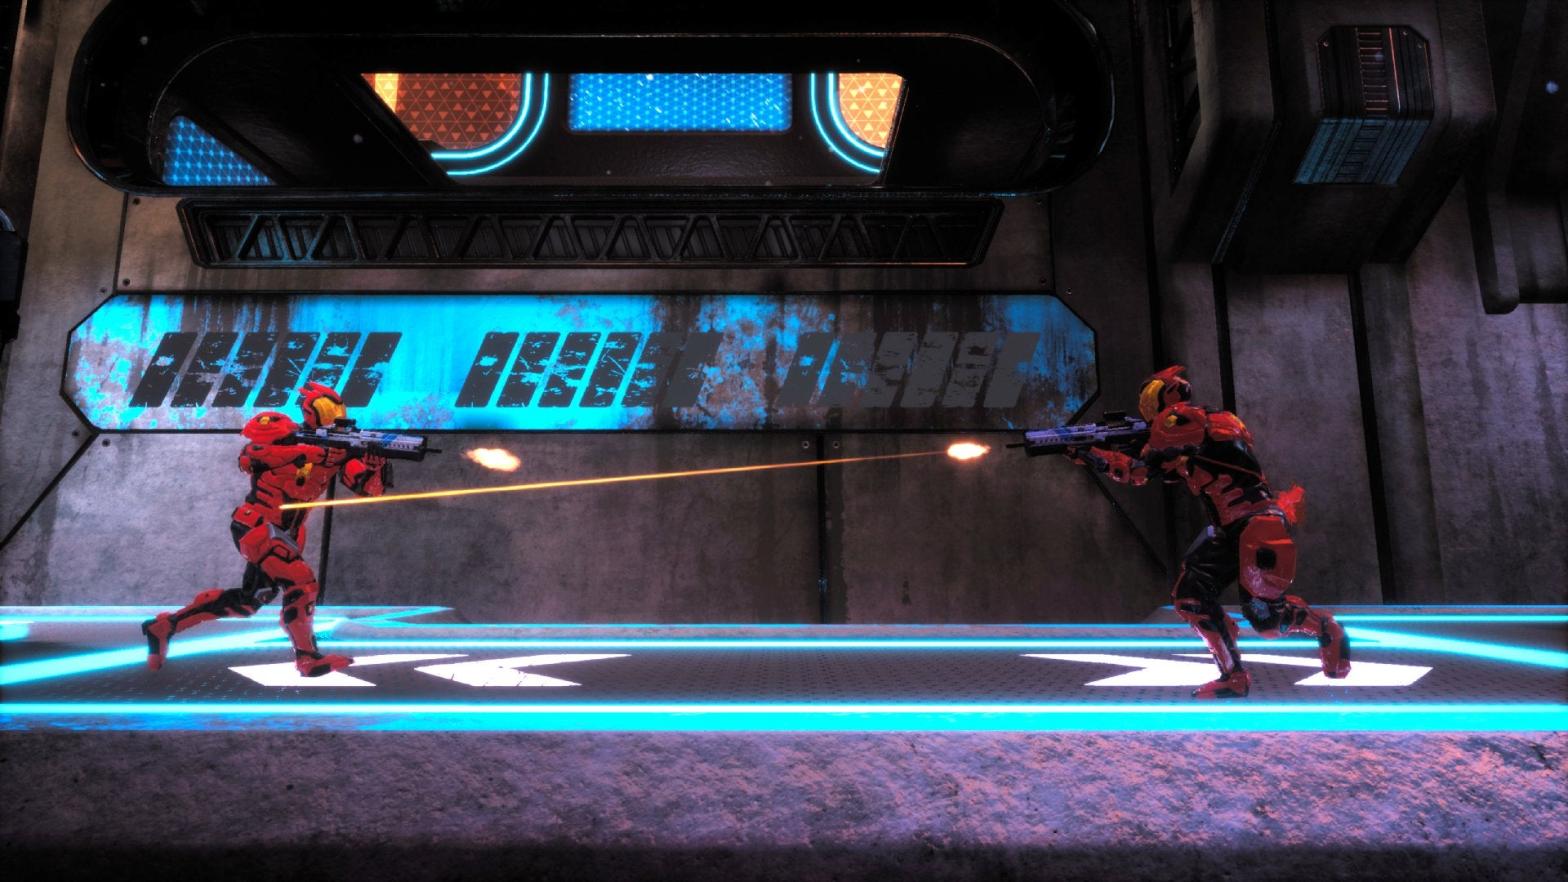 Wait, both Splitgate players are red and shooting at each other? (Image: 1047 Games)